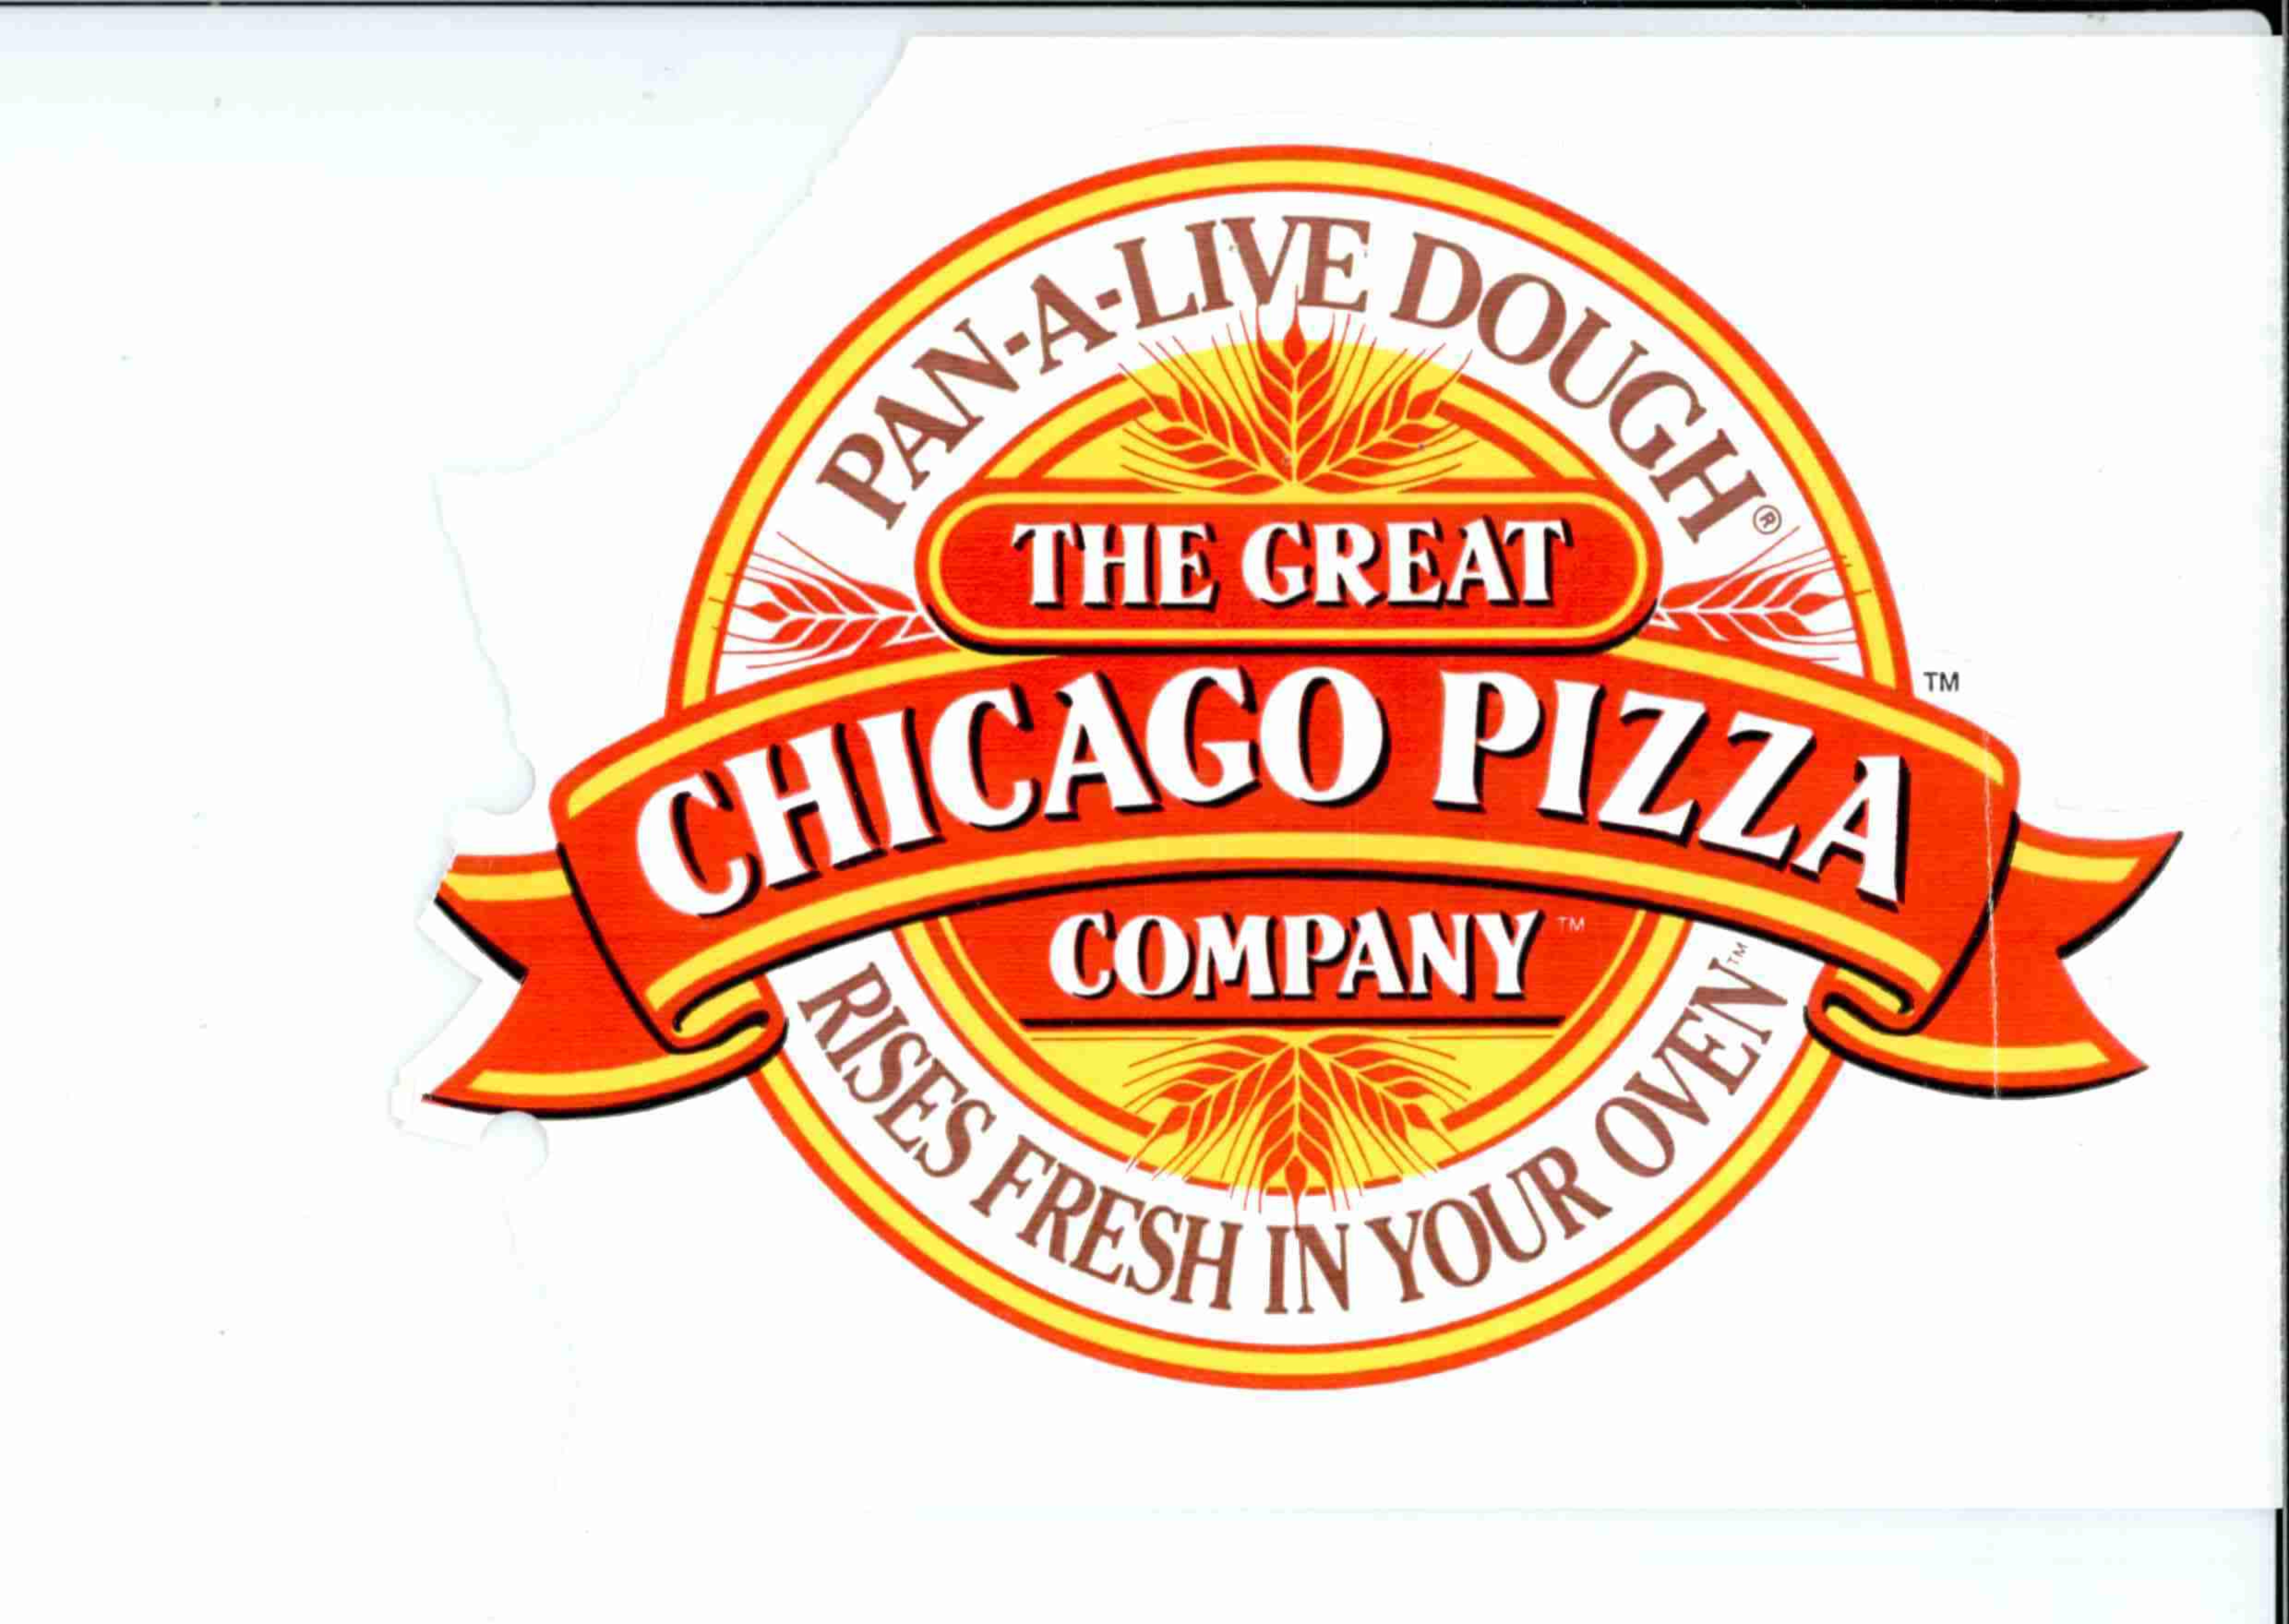  THE GREAT CHICAGO PIZZA COMPANY